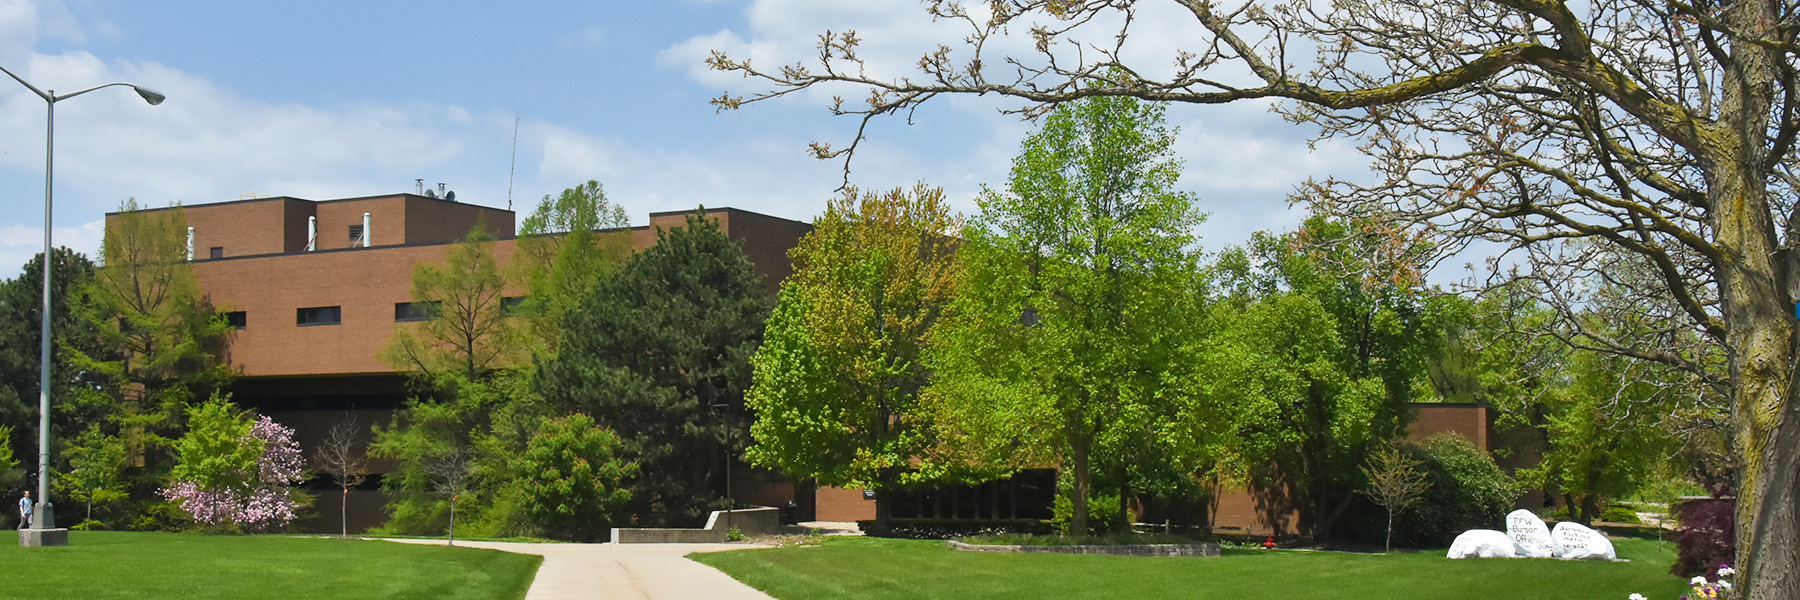 It's spring time at Indiana University Fort Wayne. The grass is green and some of the trees have flowers on them. Surrounding the lush landscape is Neff Hall. 